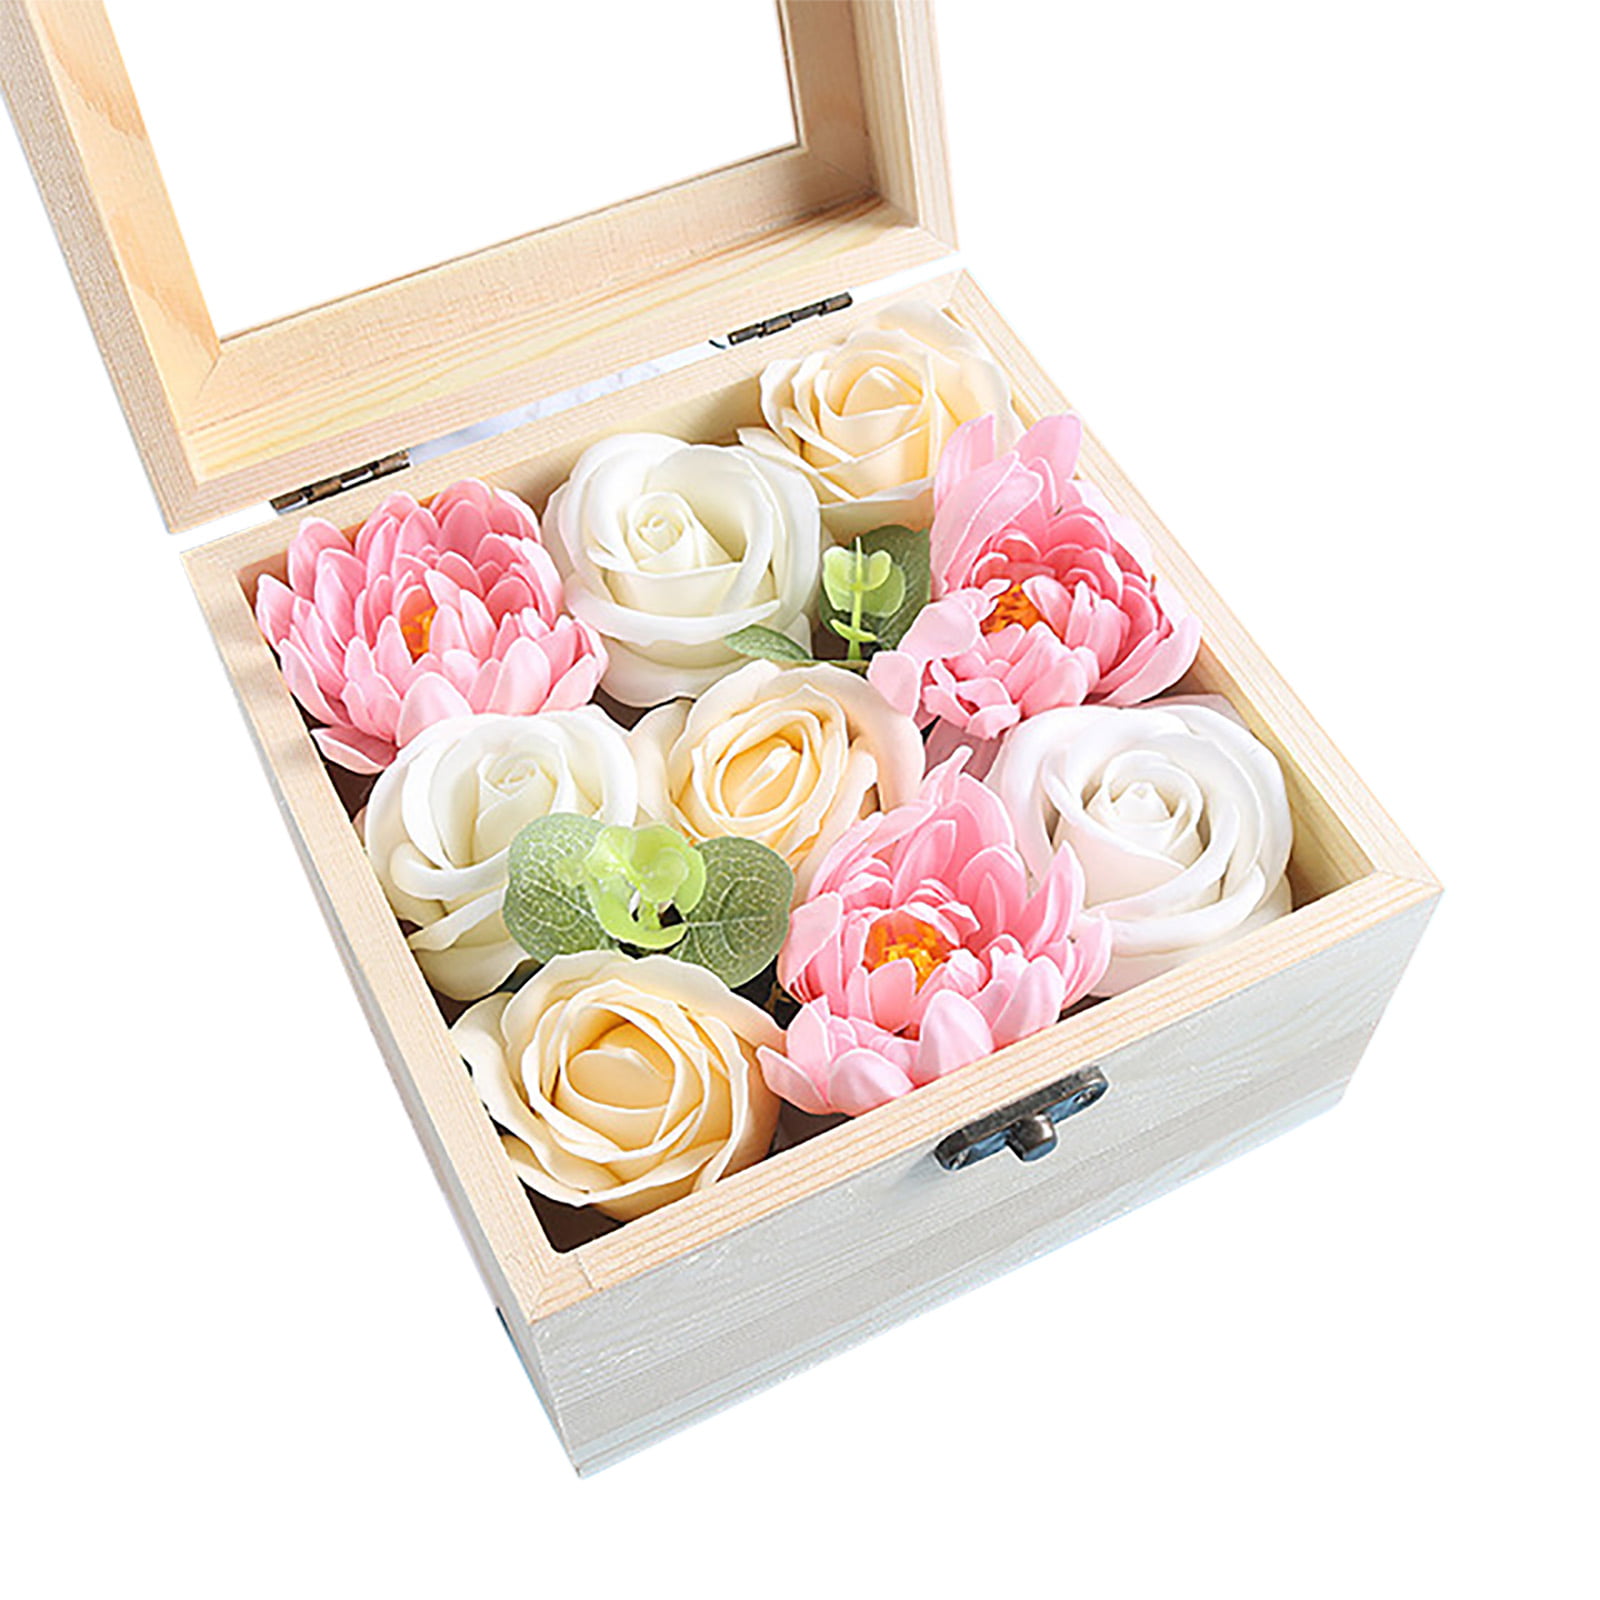 PRETYZOOM 1 Box Artificial Soap Carnation Flower Gift Box Mother's Day Flower Gift Anniversary Supplies